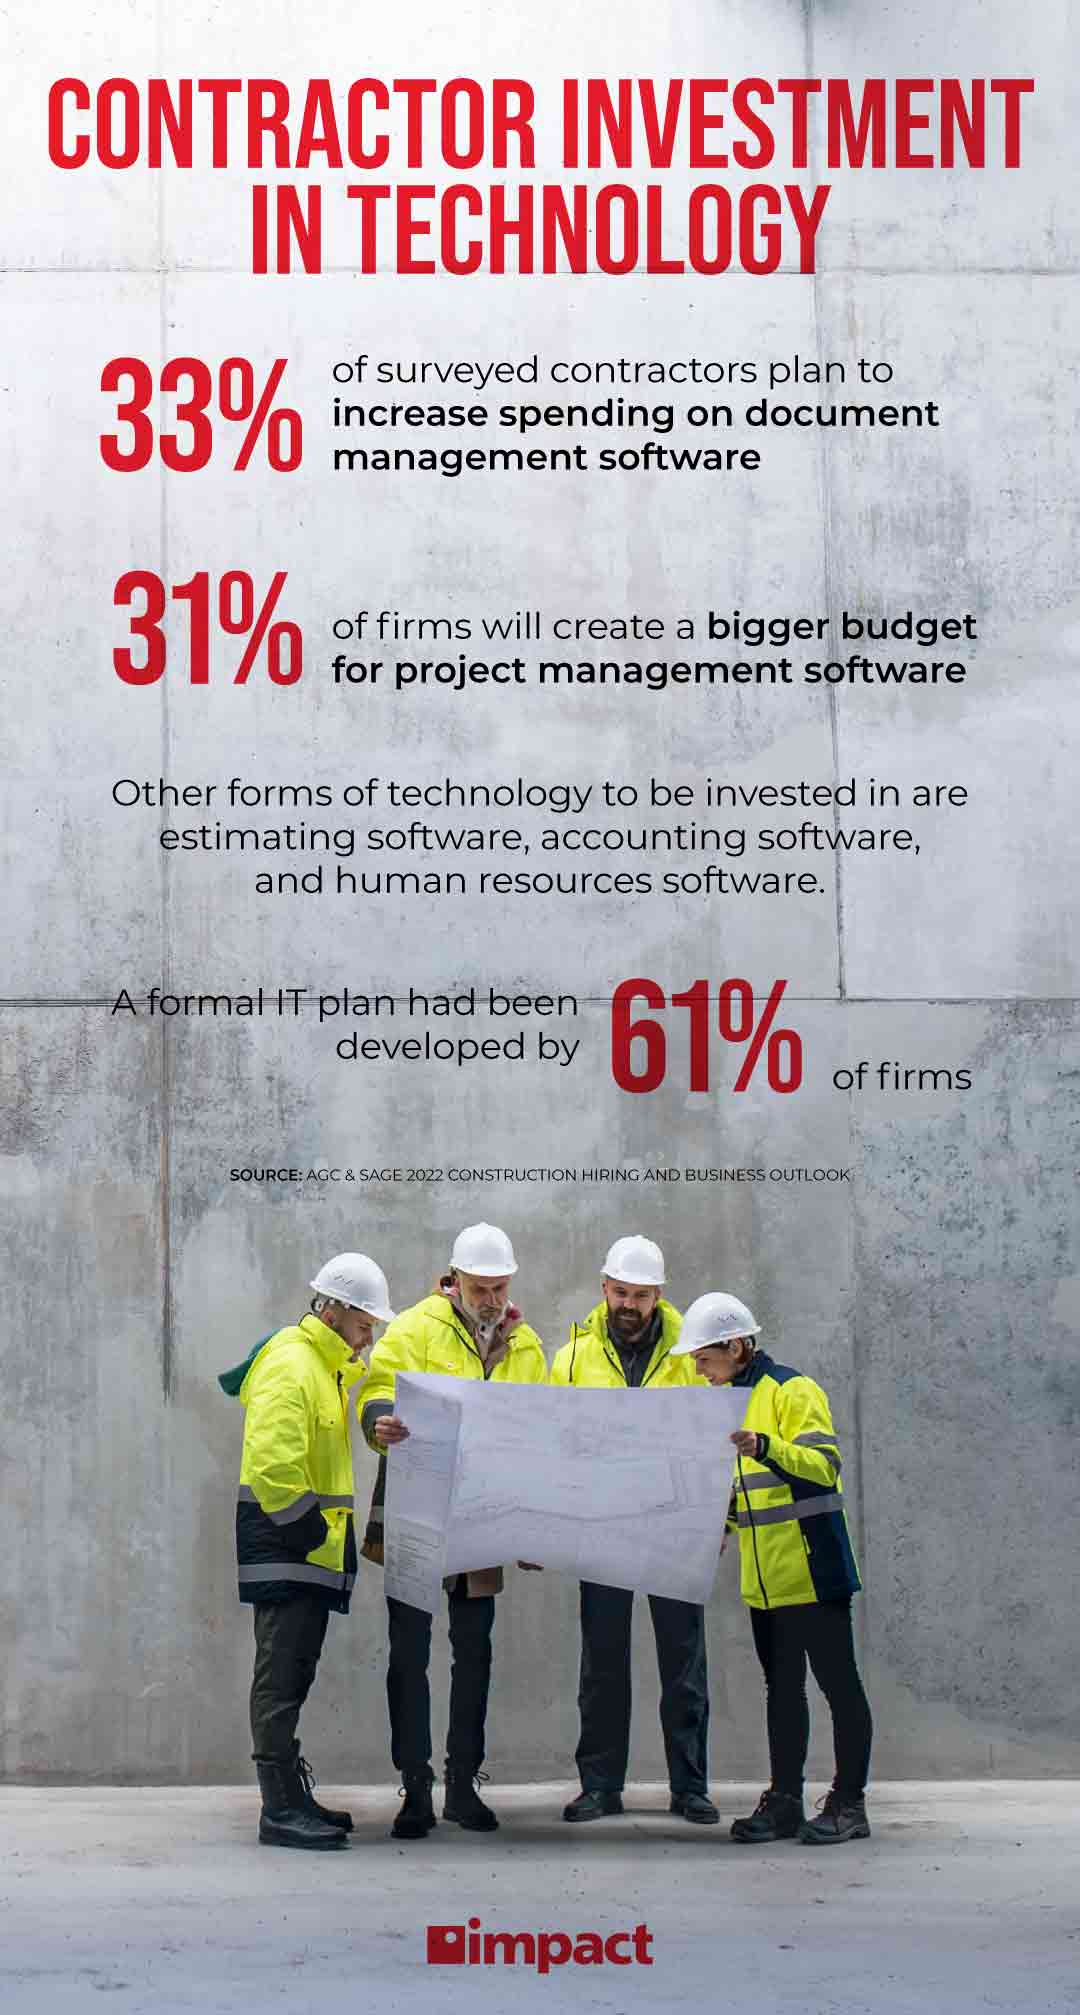 Contractor Investment in Technology Statistics | 5 Ways Contractors Can Manage Cloud Sprawl | Impact